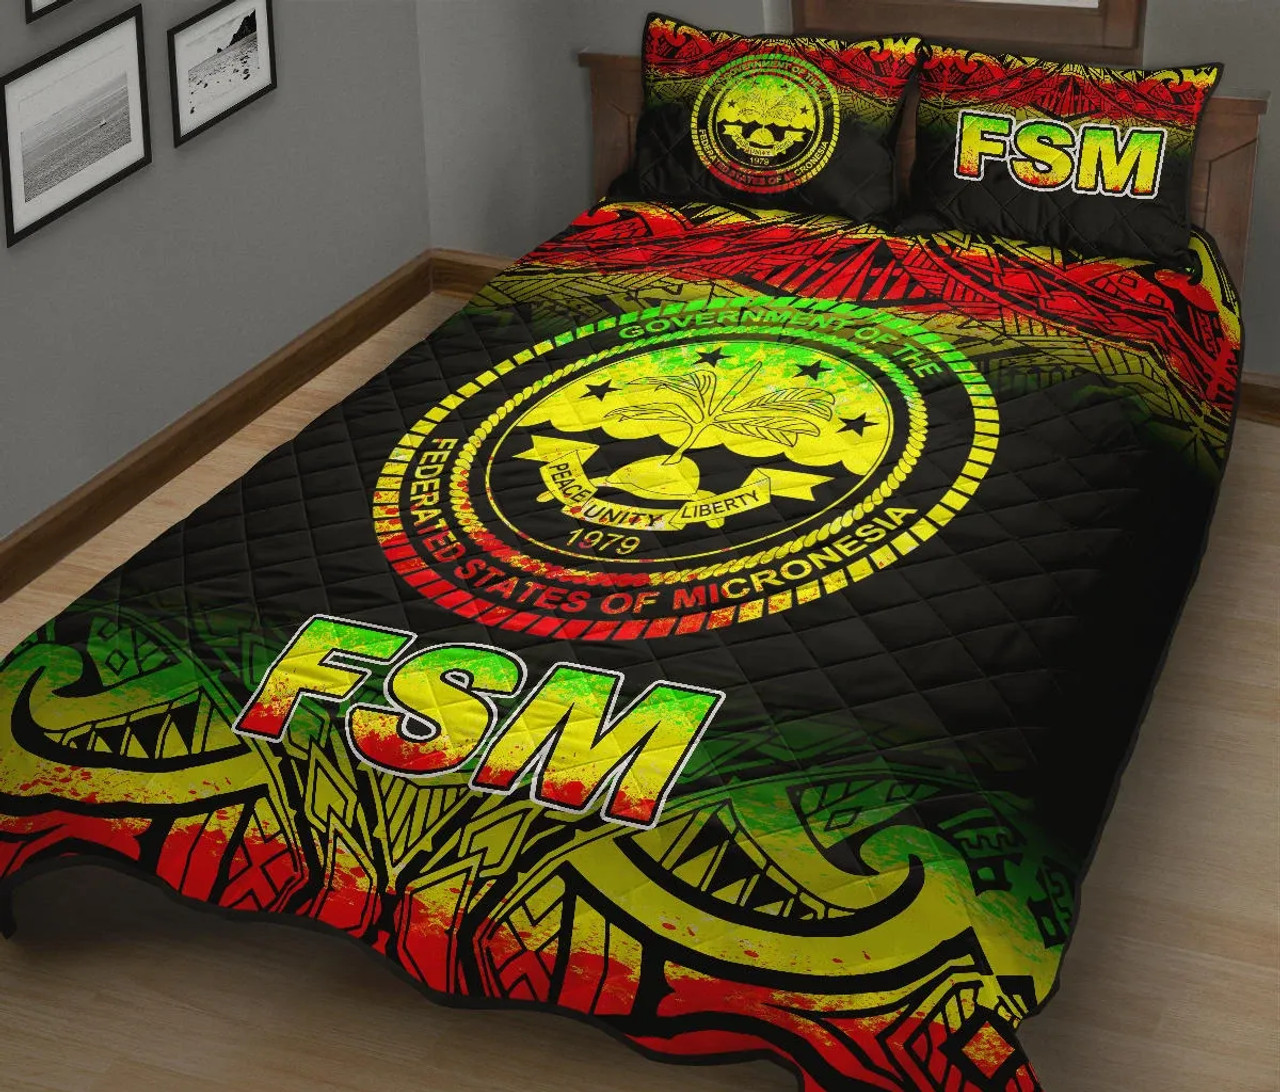 Federated States of Micronesia Quilt Bed Set - Federated States of Micronesia Seal Fog Style Reggae Version 3